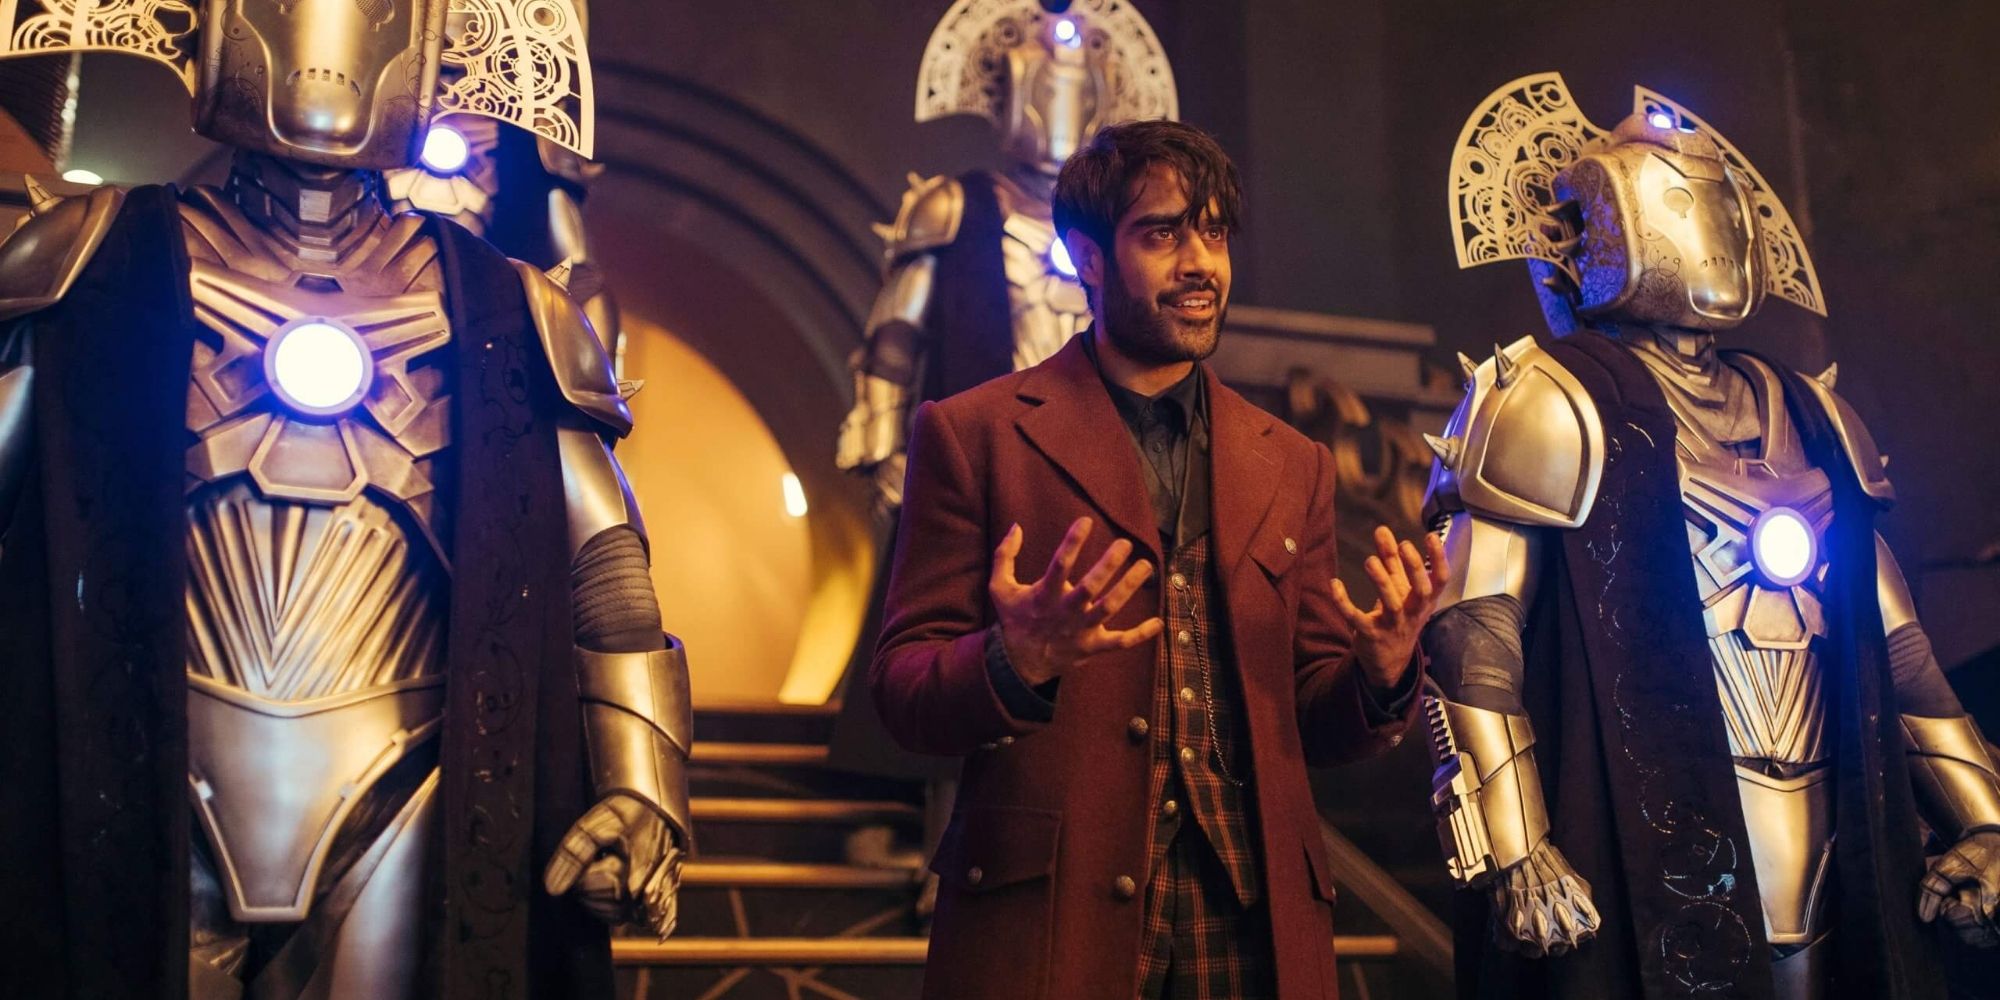 The Master (Sacha Dhawan) and the Cybermasters in the Doctor Who episode The Timeless Children